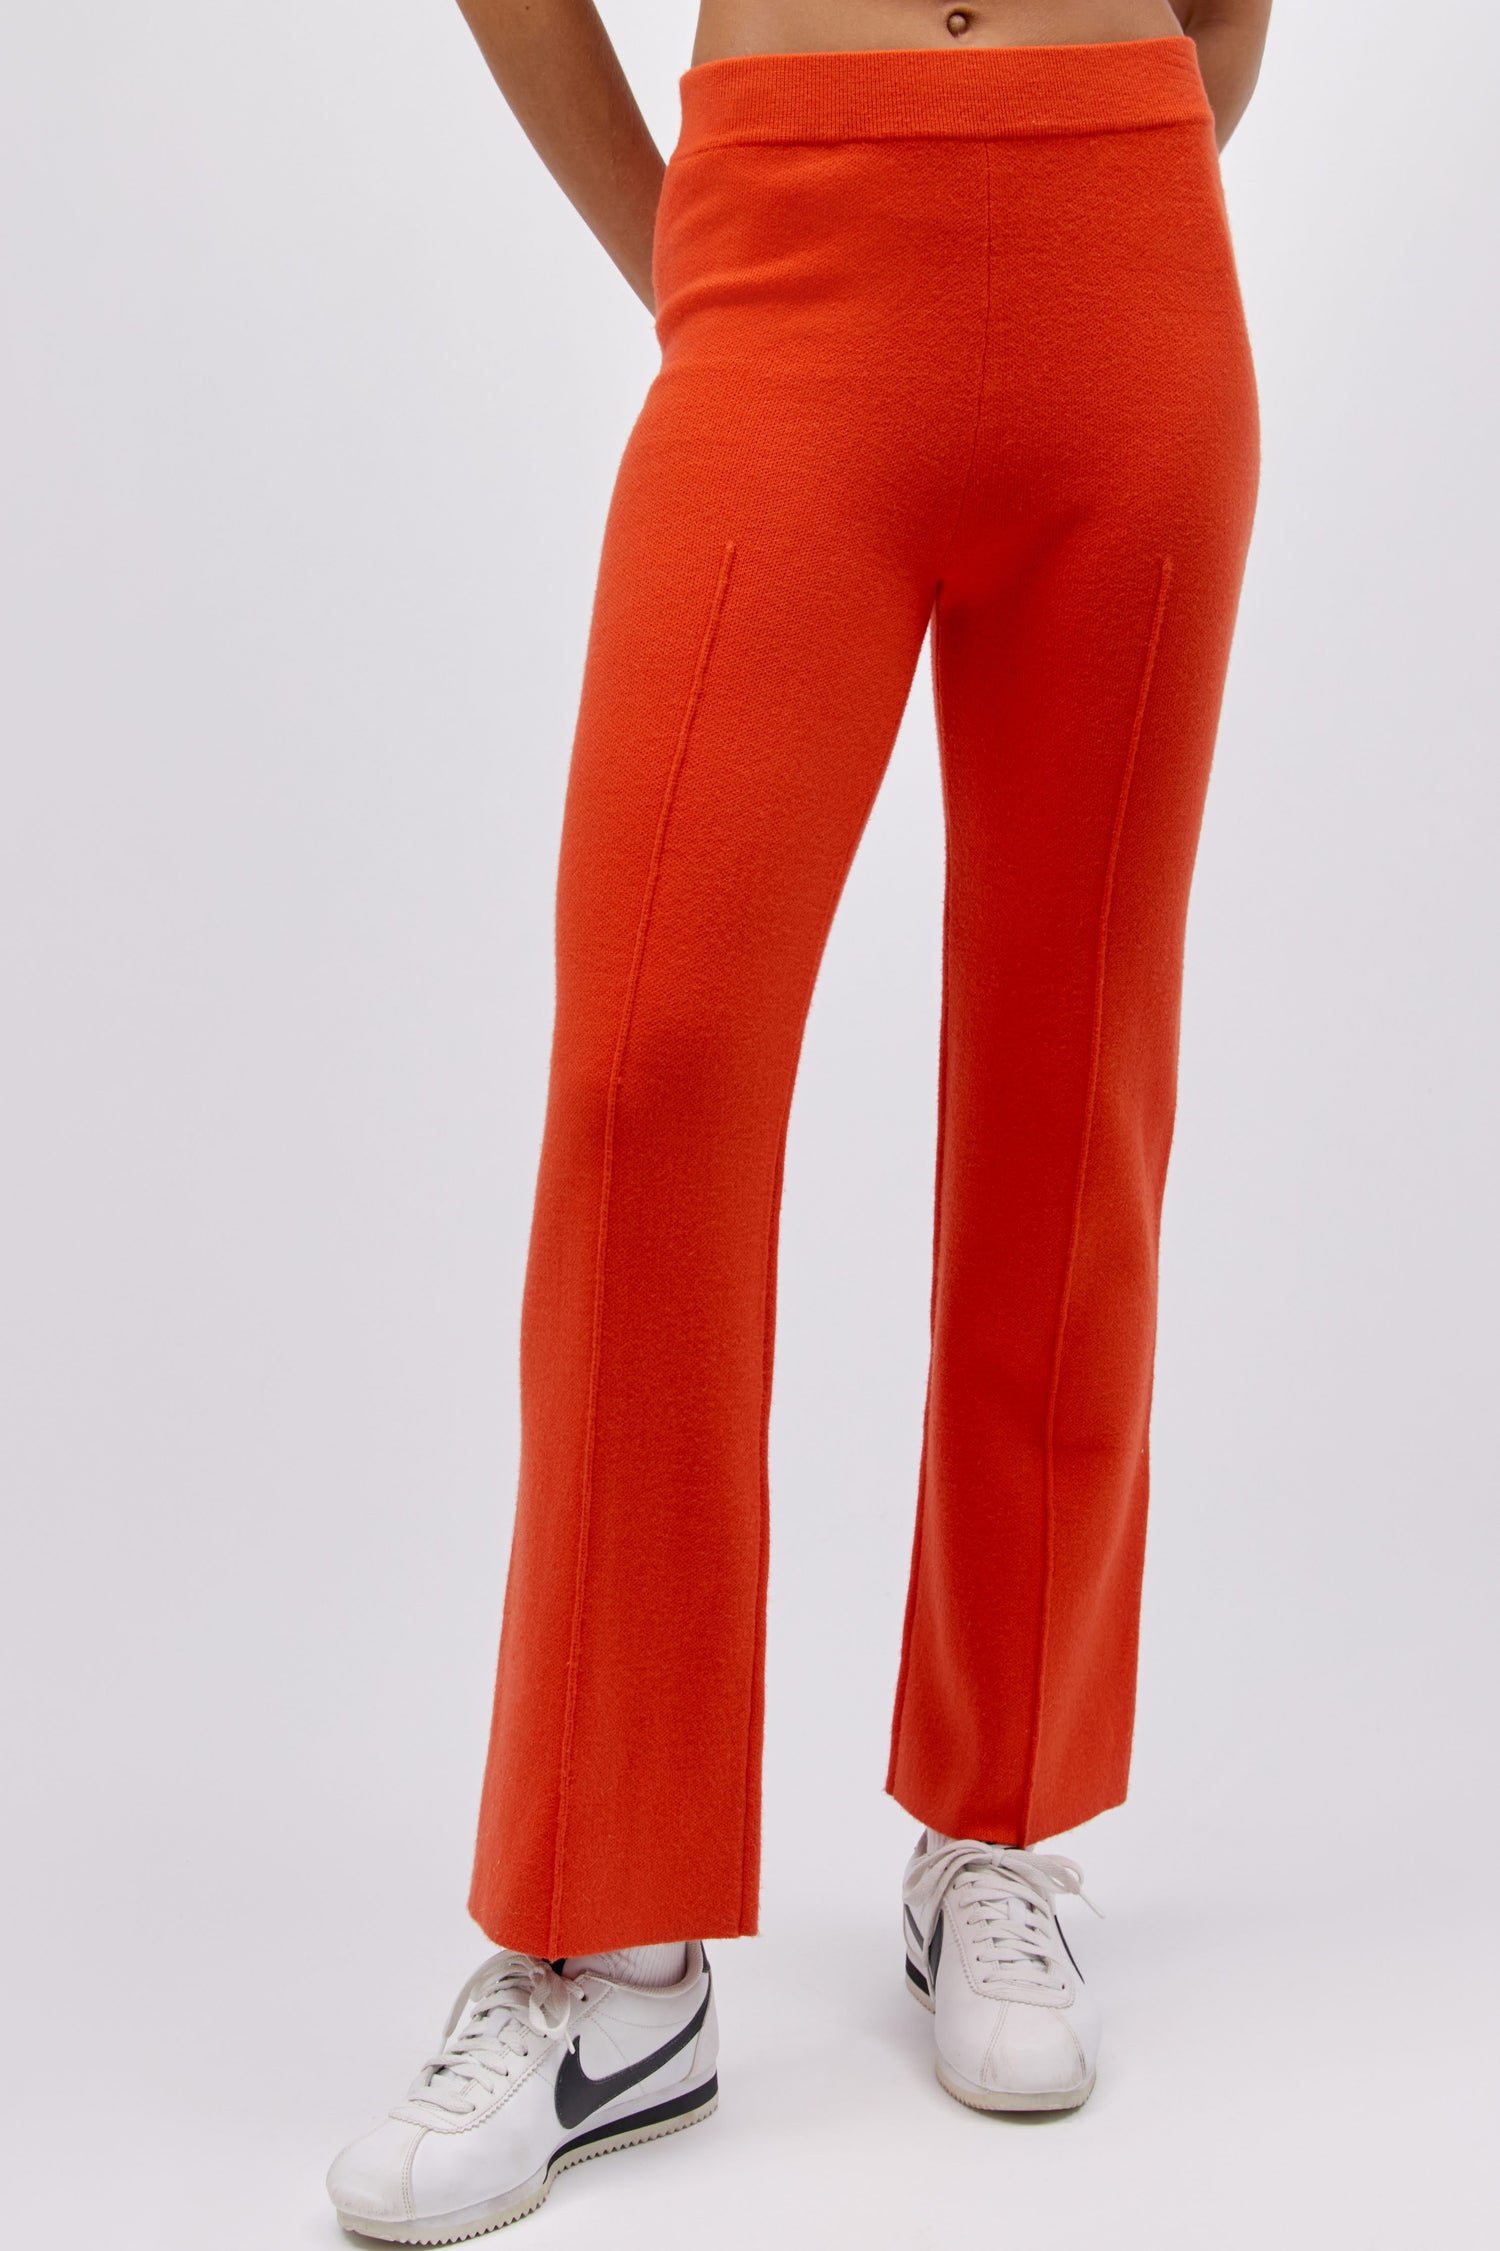 A model featuring a hot orange pintuck pant.